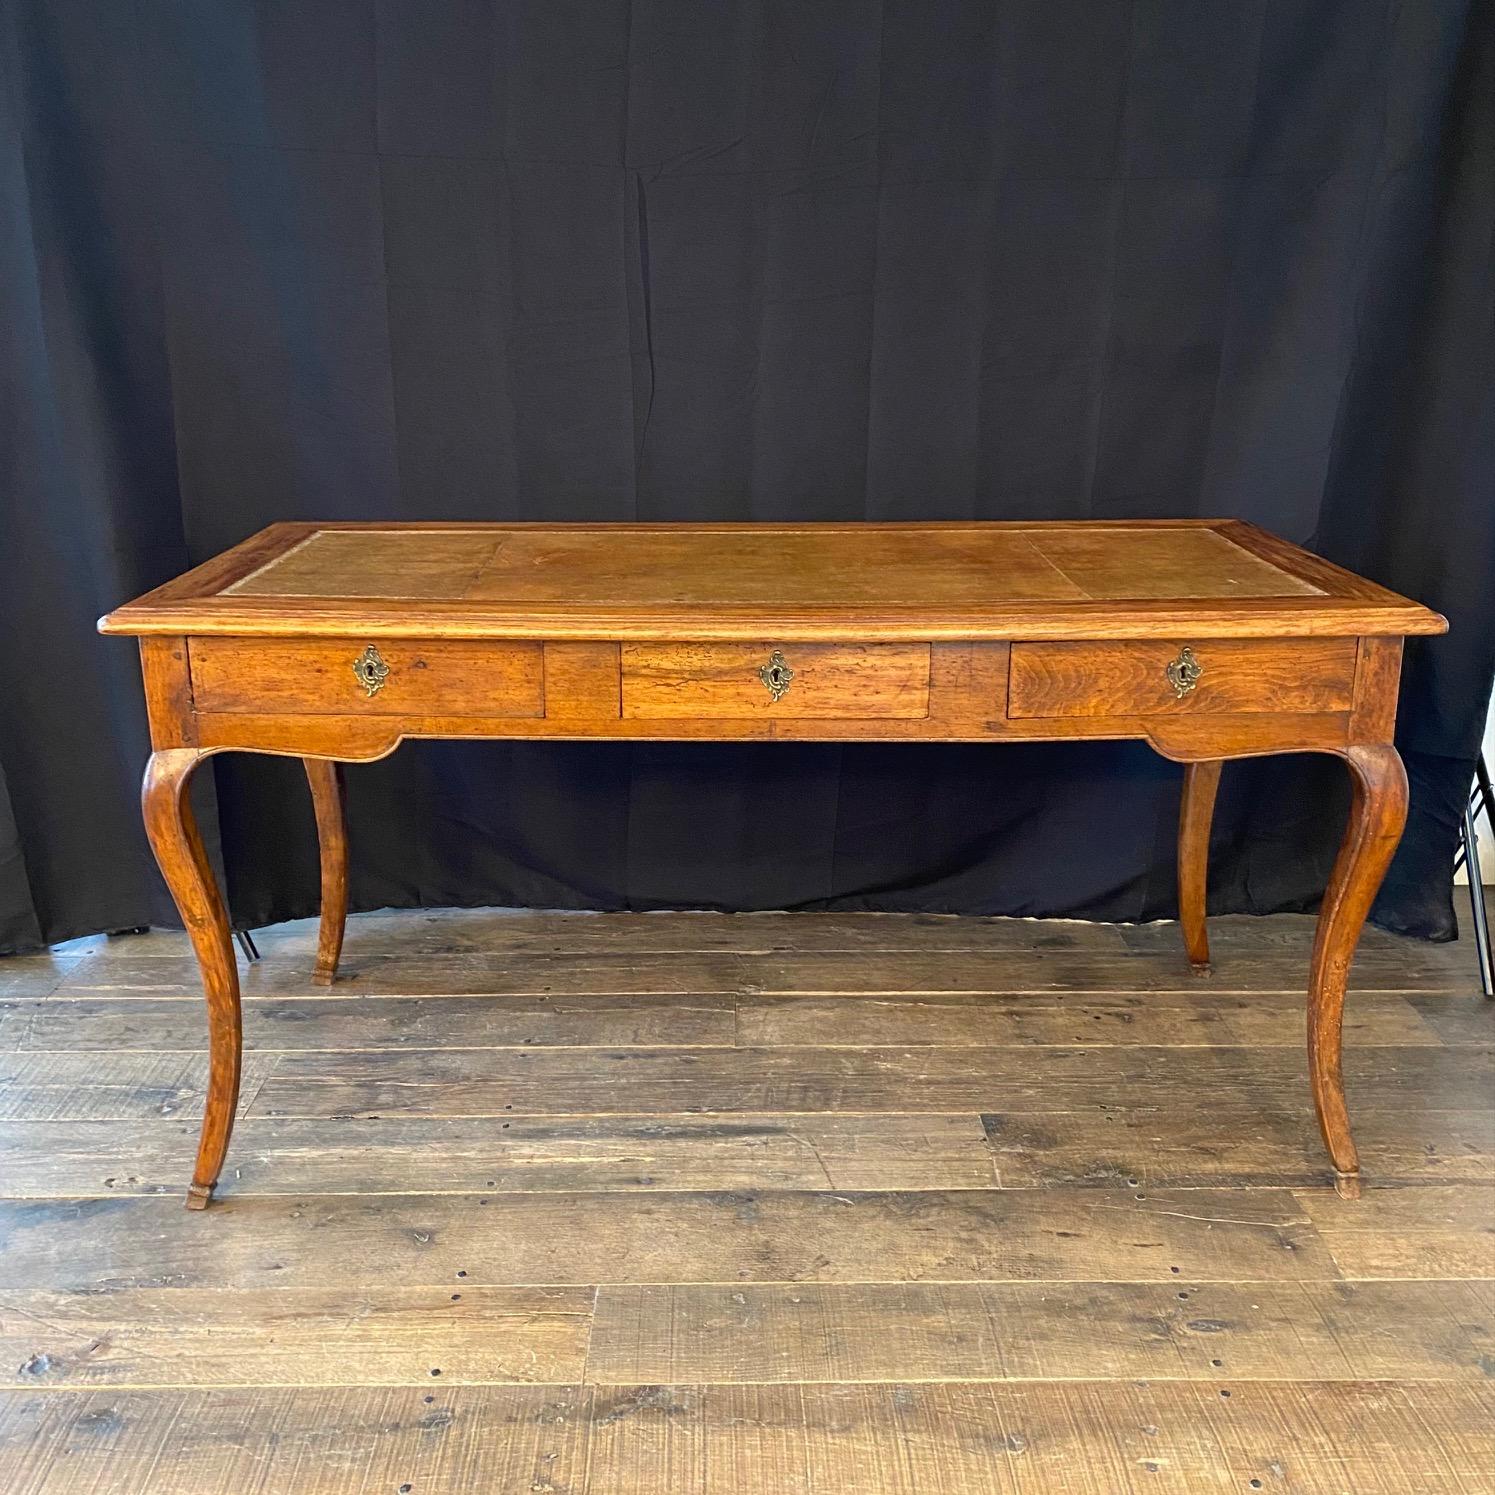 Elegant French Louis XV 19th century walnut three-drawer (dovetailed) desk from Avignon with embossed leather top, original key and cabriole legs. This remarkable desk, crafted from walnut and featuring a rich original embossed leather top and